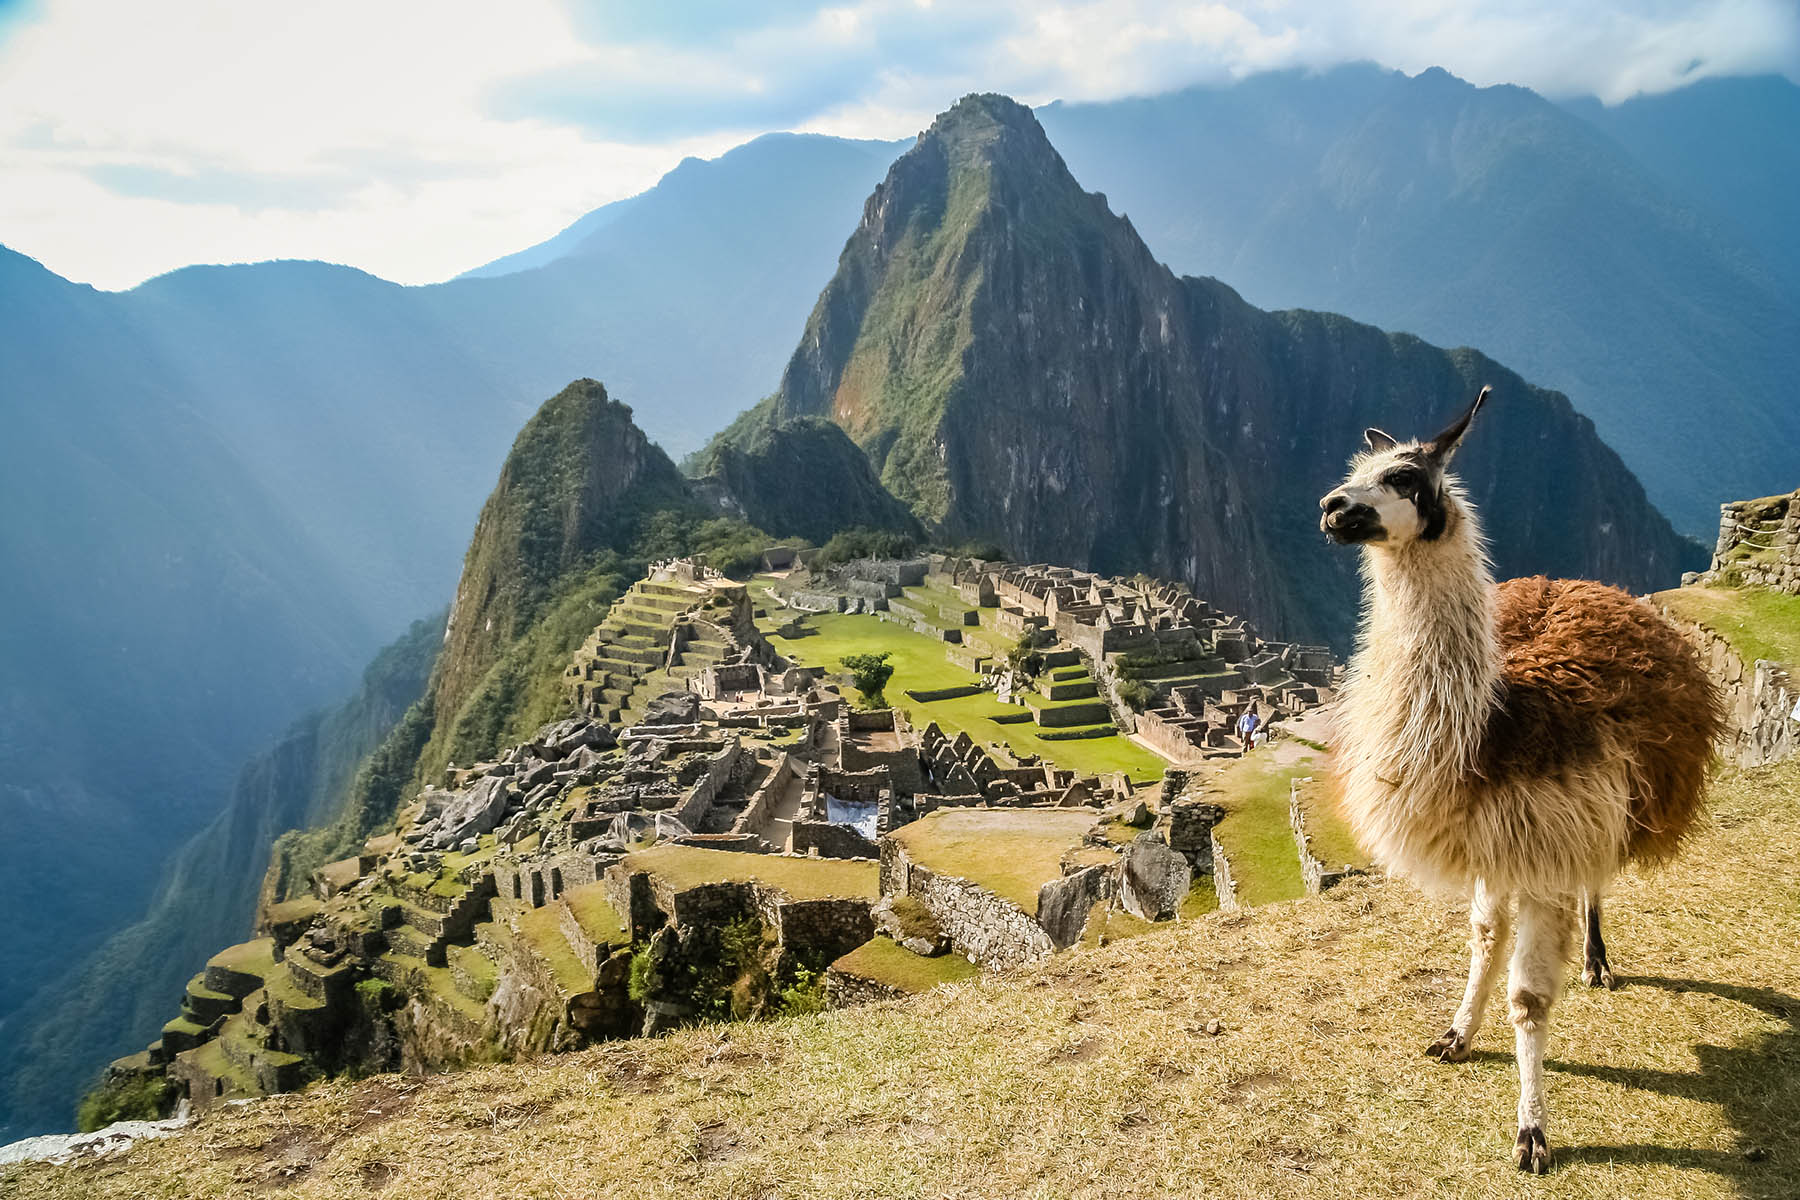 South American Explorations: From the Amazon to Machu Picchu